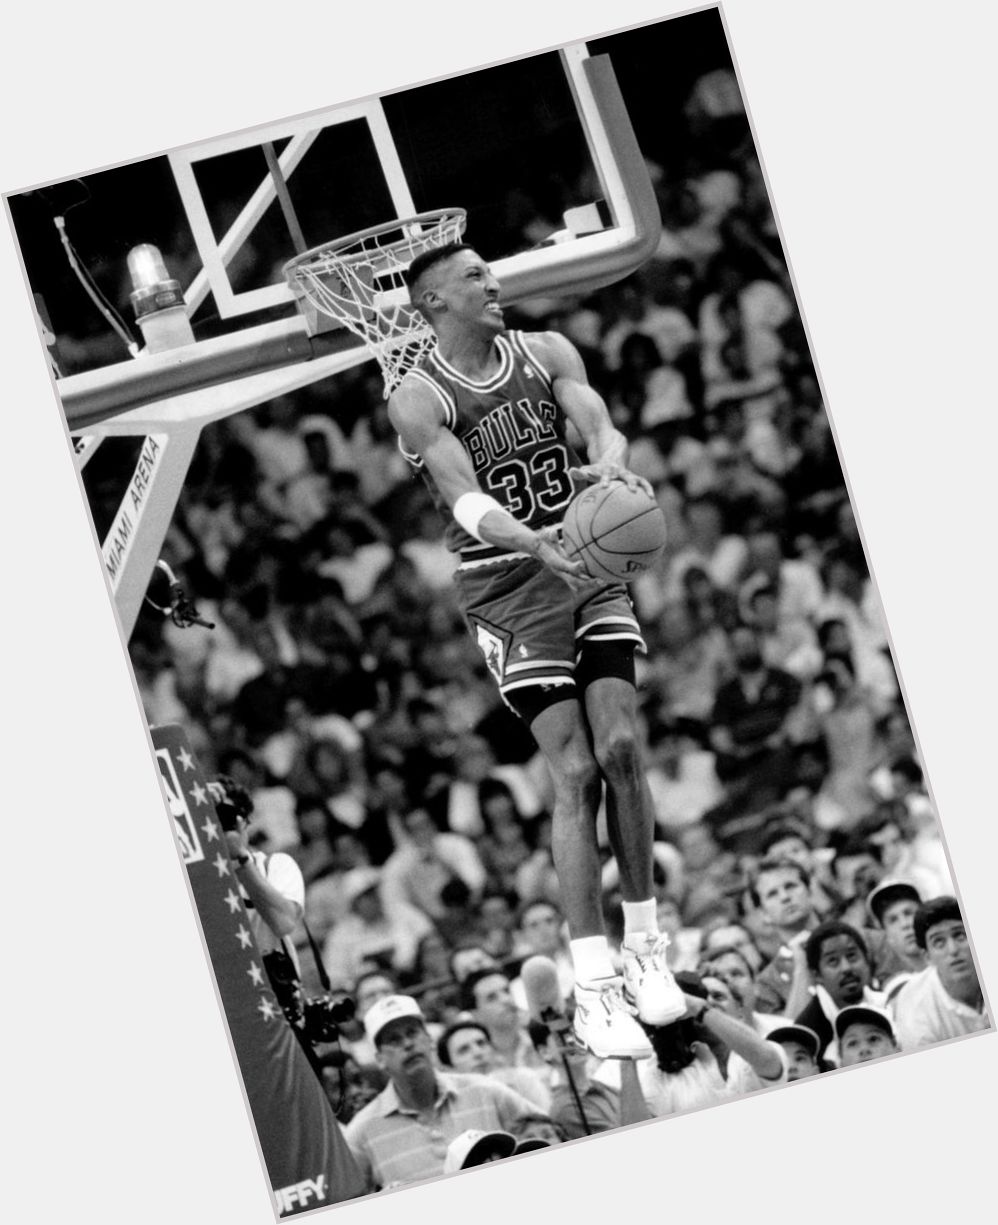 Happy Birthday Scottie Pippen!
The Walker Collective - A Law Firm For Creatives
 